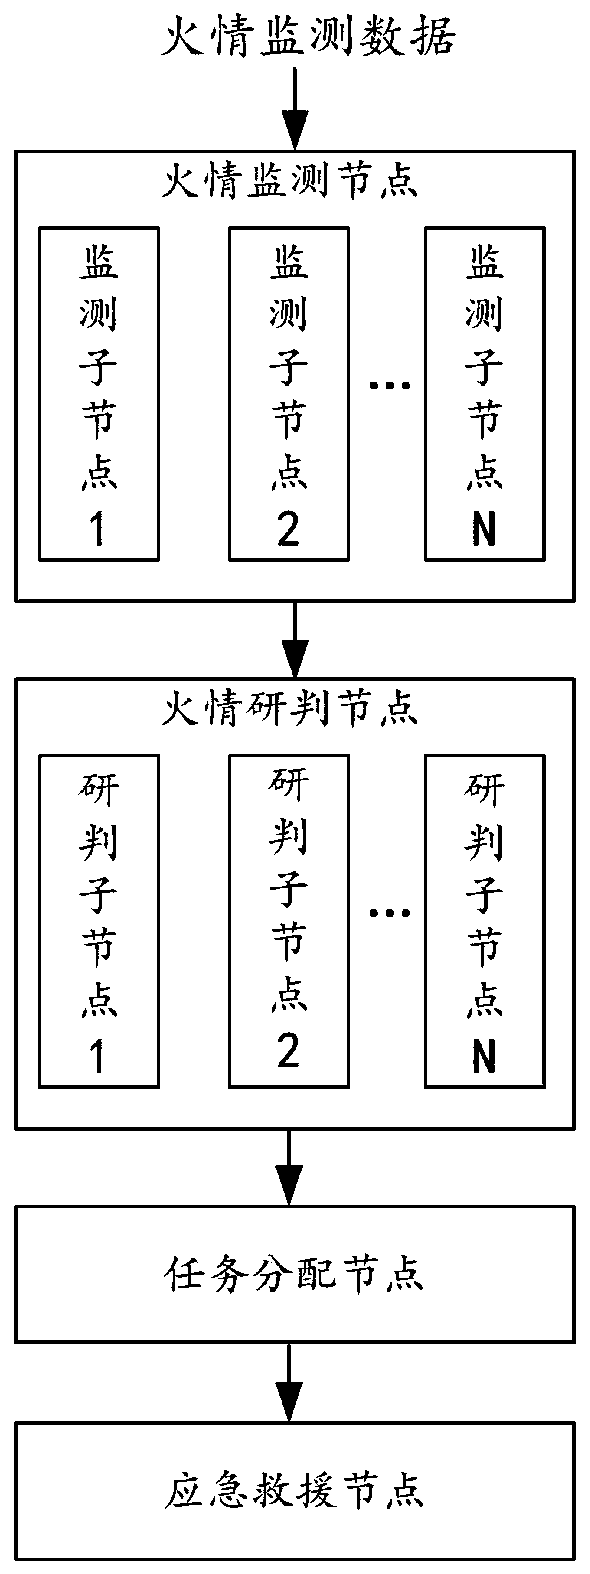 Fire extinguishing system fire handling method and device based on block chain